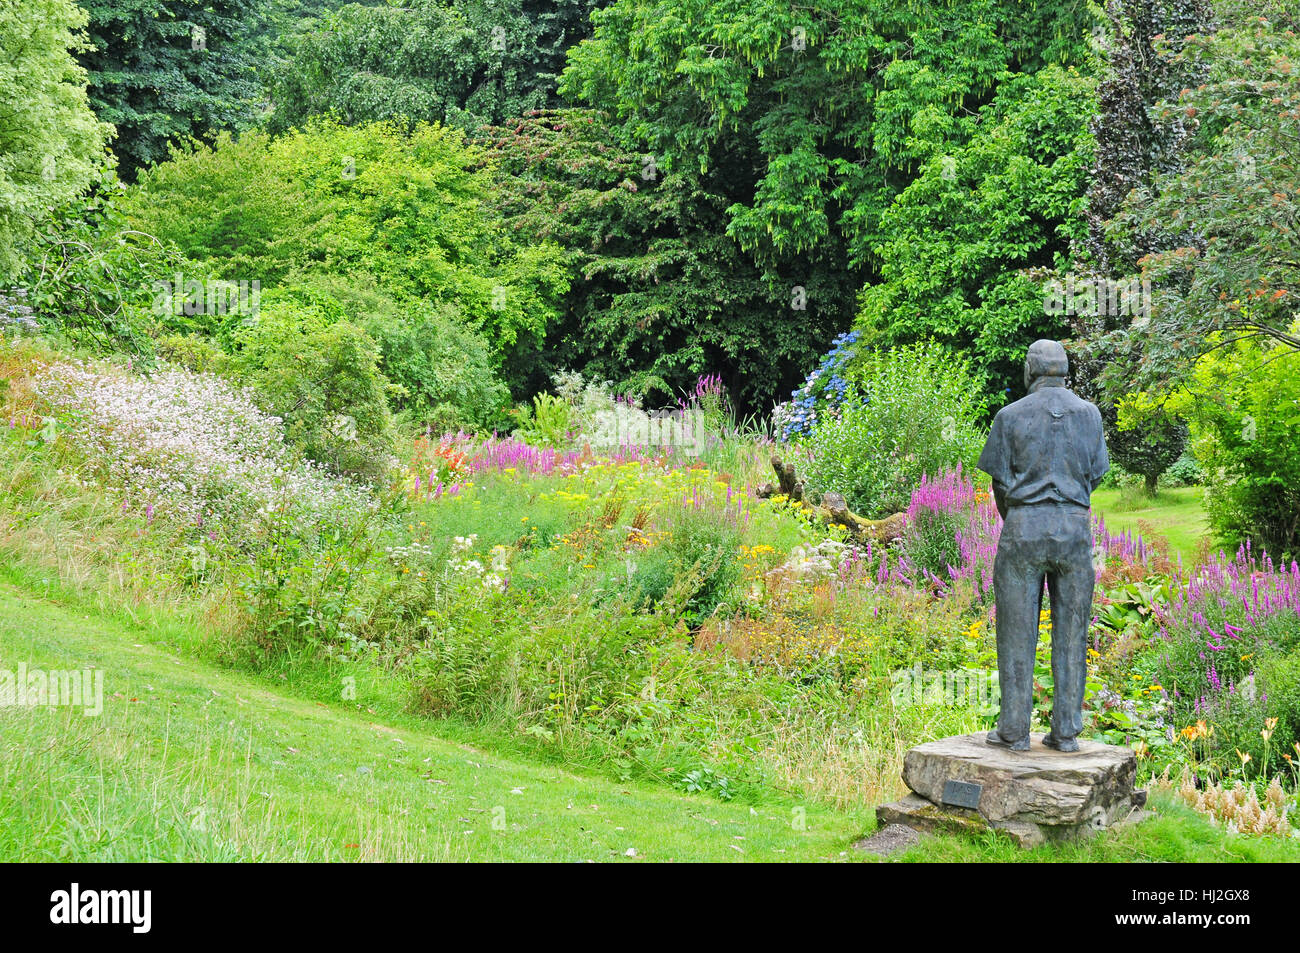 Bronze Statue of Dr Jimmy Smart, who created  Marwood HIll Gardens in 1950s.  Overlooking the bog garden. Stock Photo